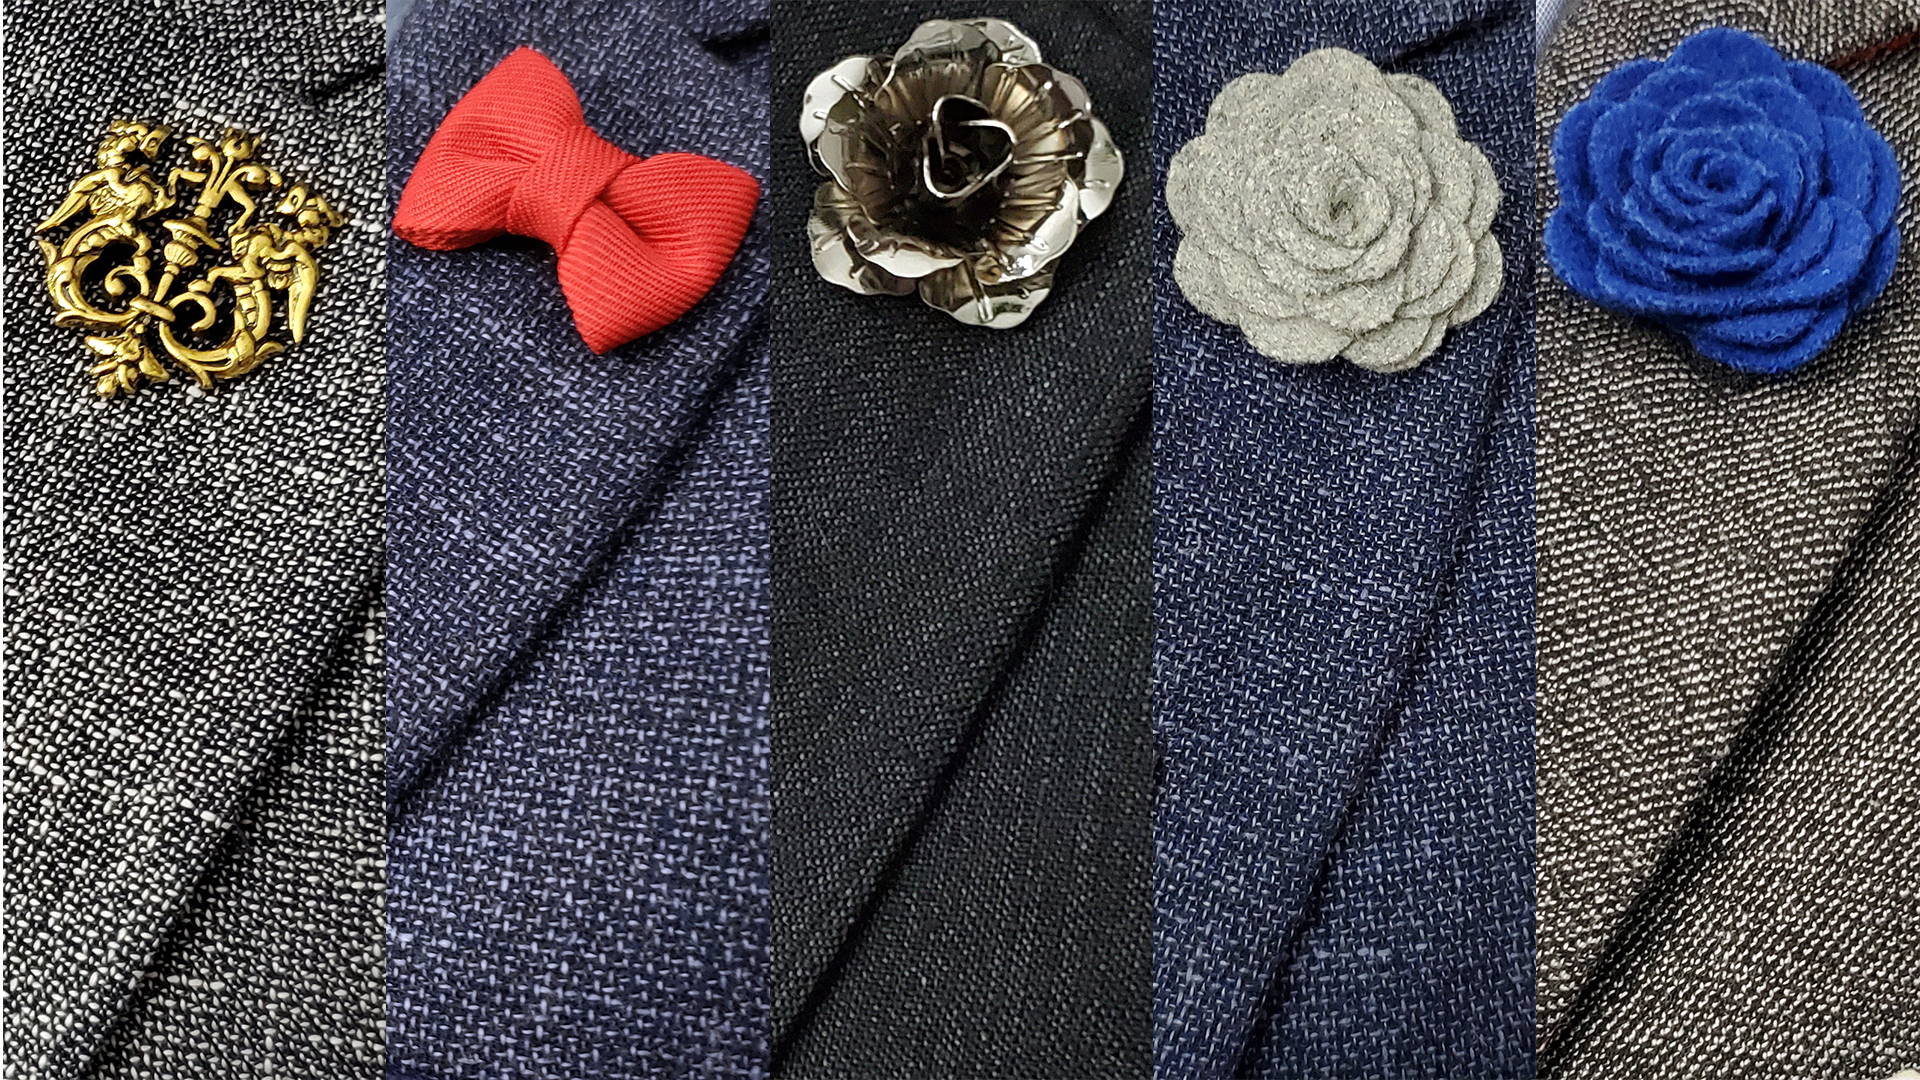 5 Lapel Pins You Must Own